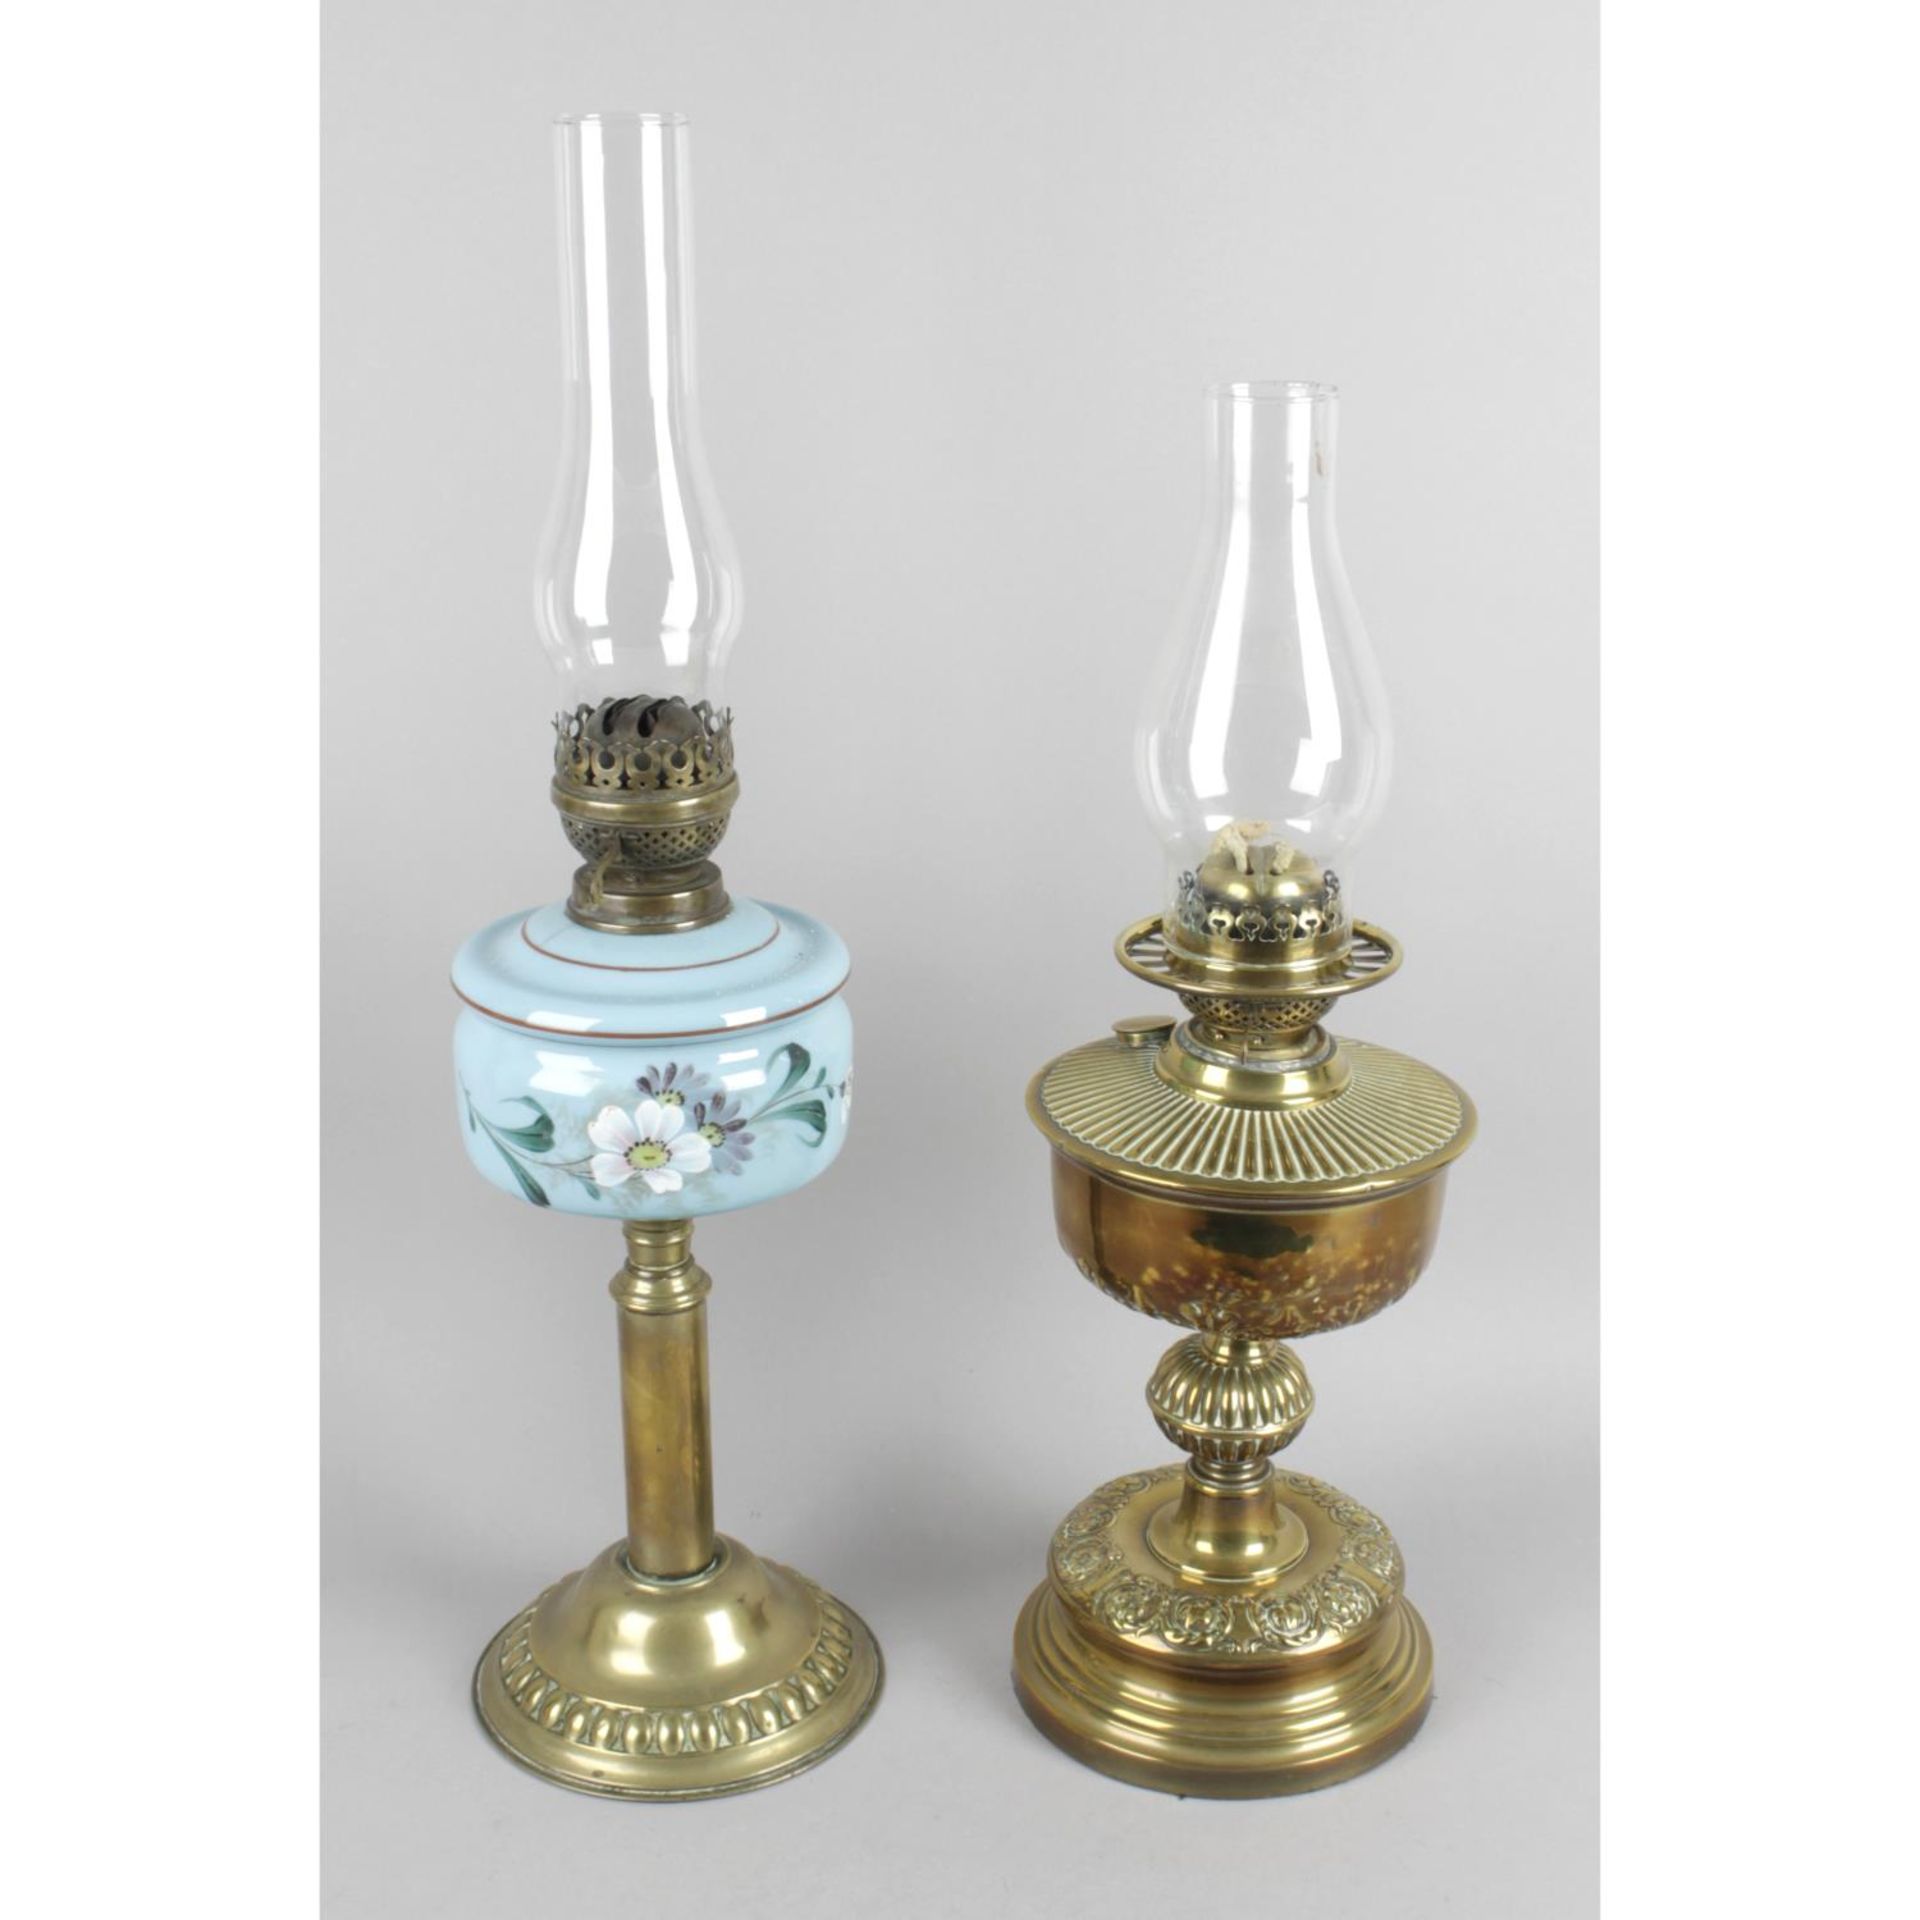 A Victorian brass table lamp with floral decorated blue glass reservoir and Duplex burner.